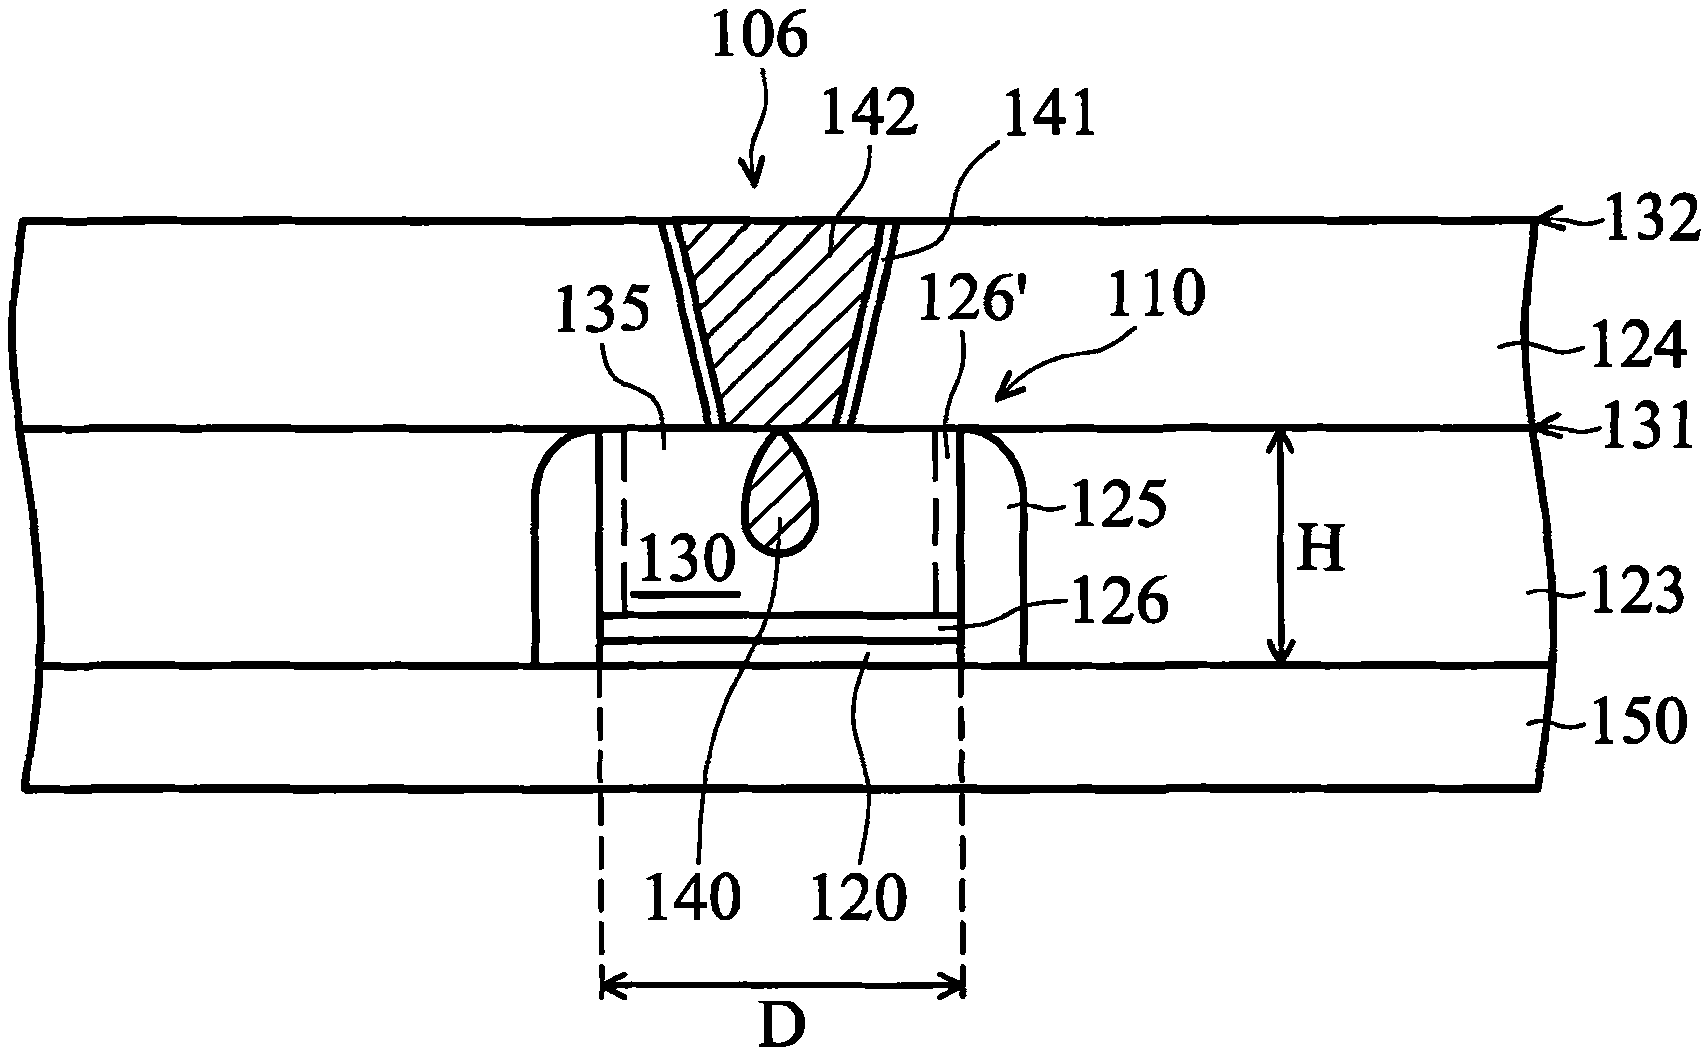 Integrated circuit structure and method to stop contact metal from extruding into gate